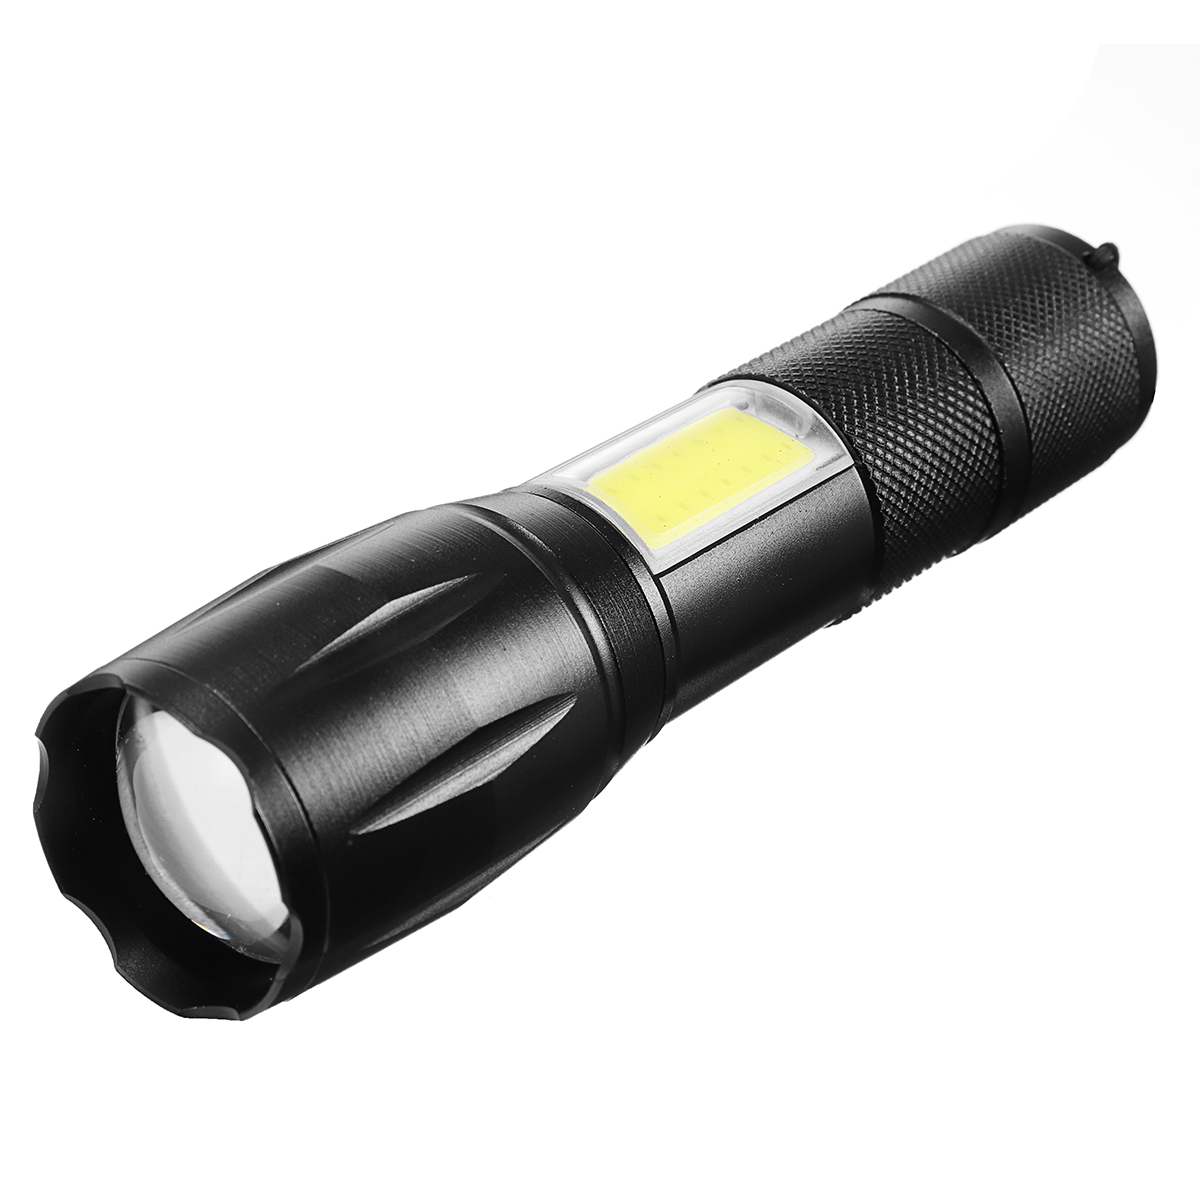 

4000LM T6 COB LED 4 Modes Flashlight Zoomable Tactical Torch USB Rechargeable Lamp